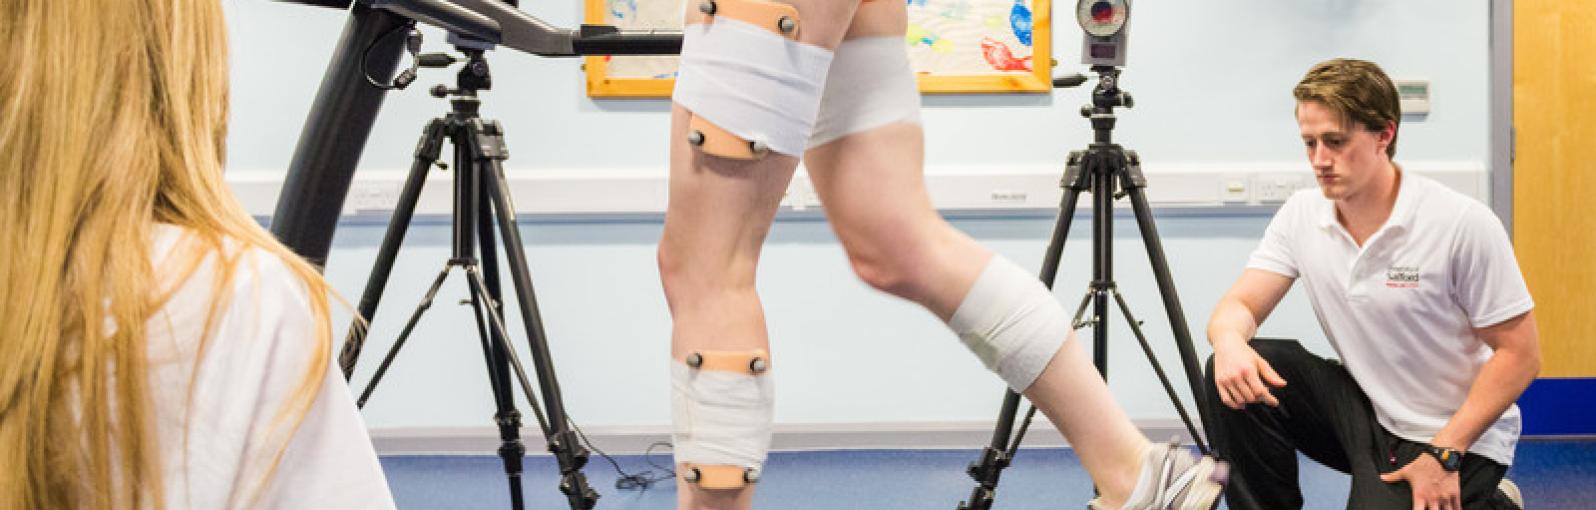 Clinical gait analysis at the University of Salford